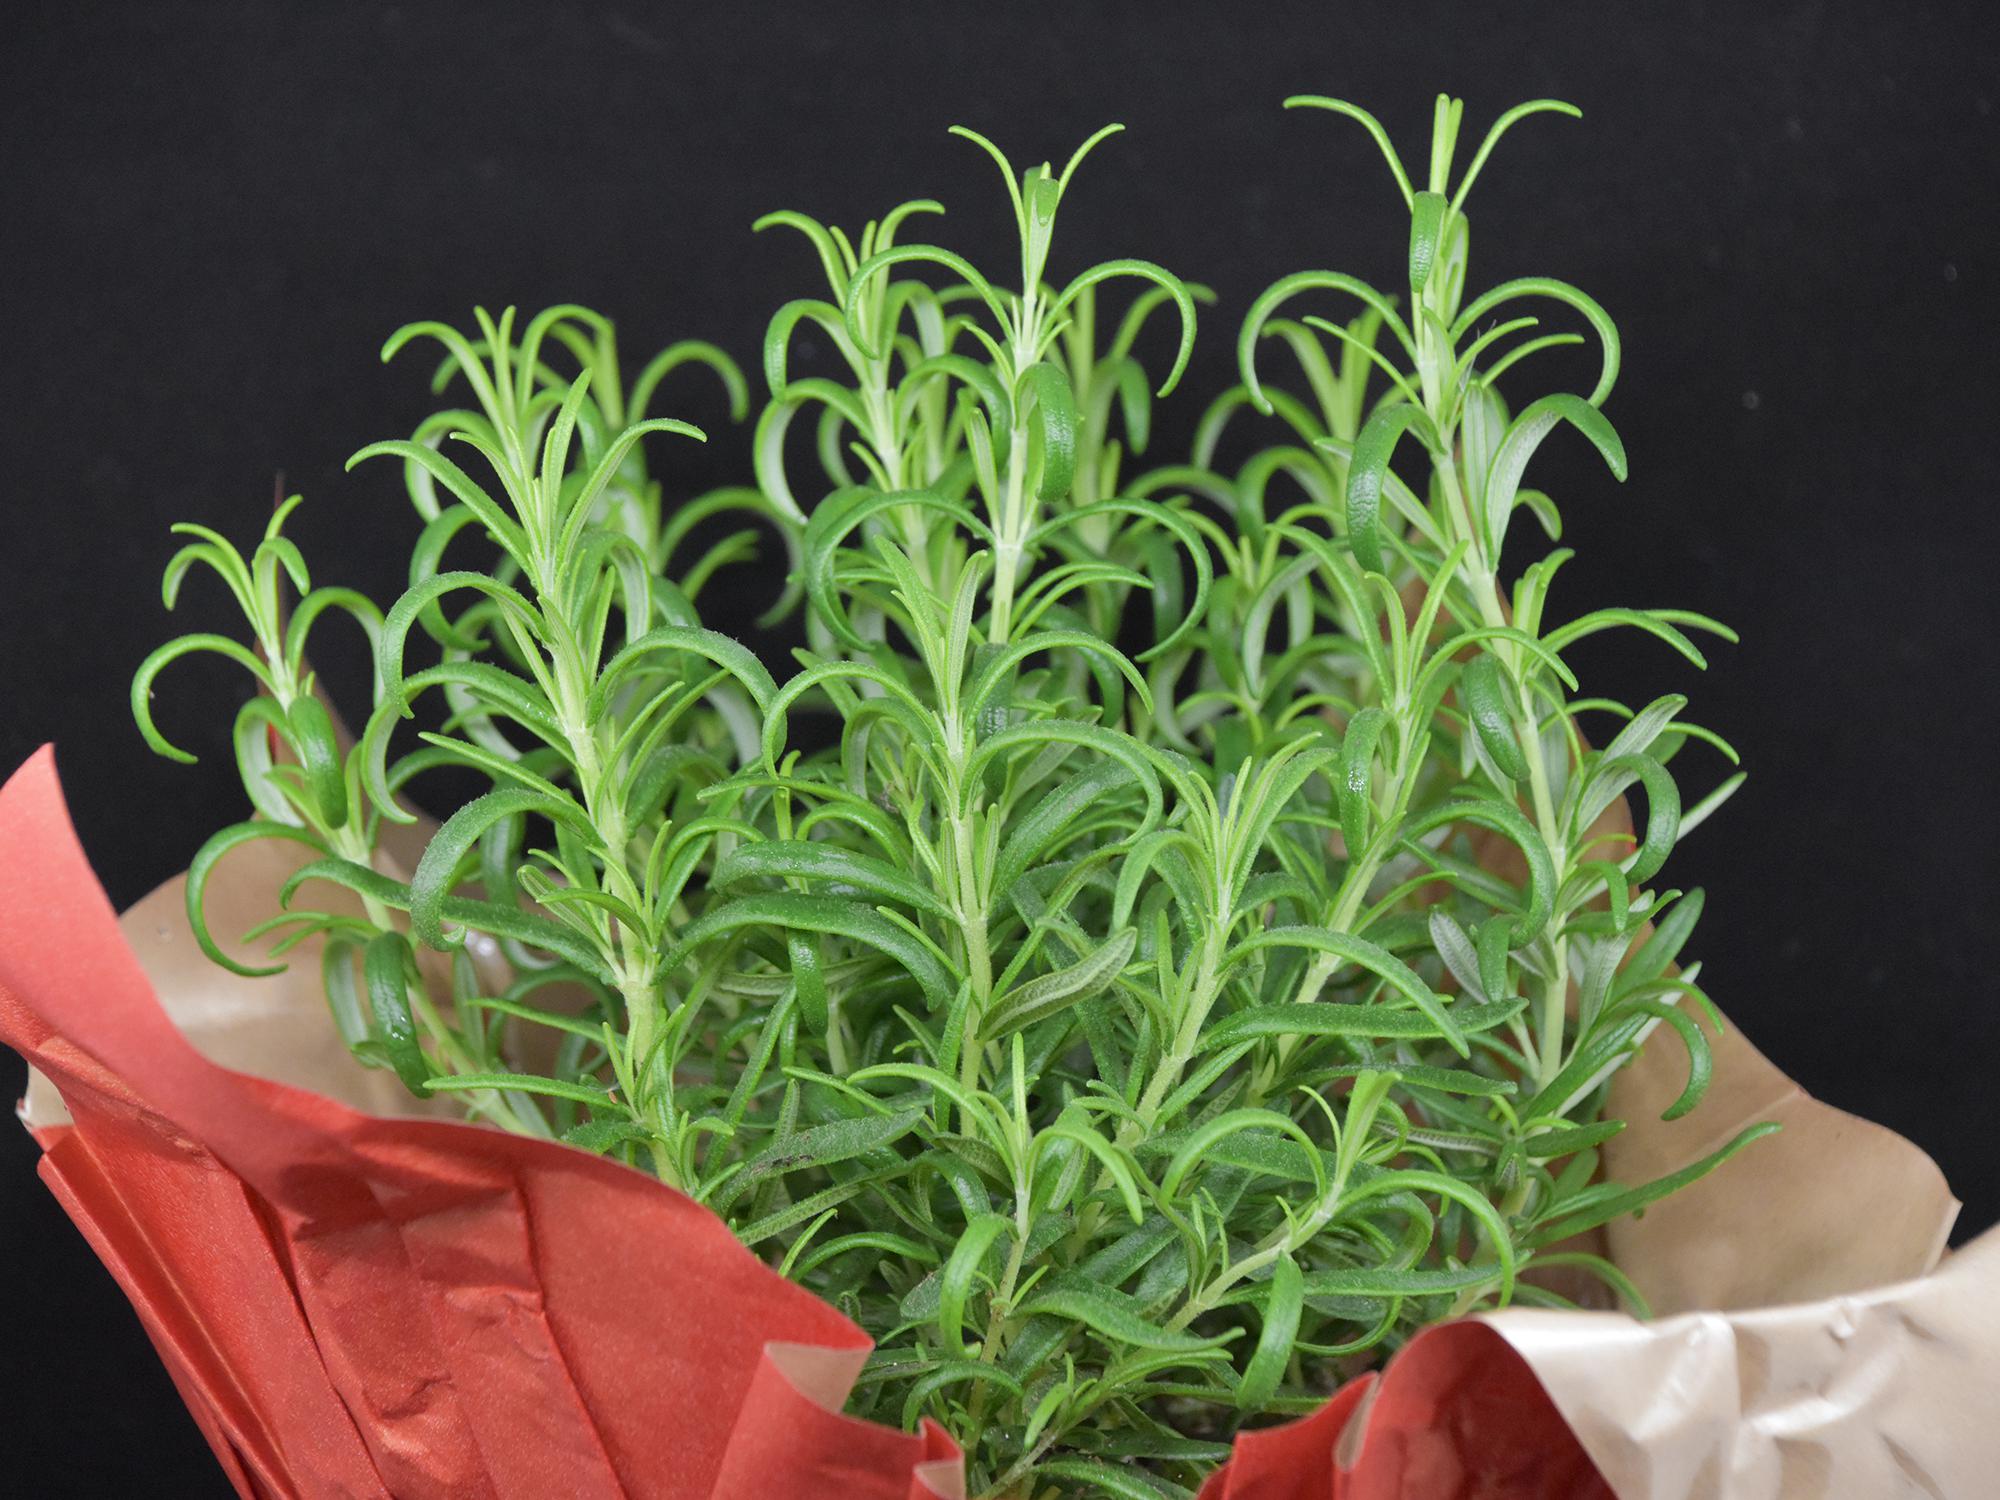 Herb plants make excellent gifts, as they can add beauty to indoor décor and good flavors to holiday meals. (Photo by MSU Extension/Gary Bachman)